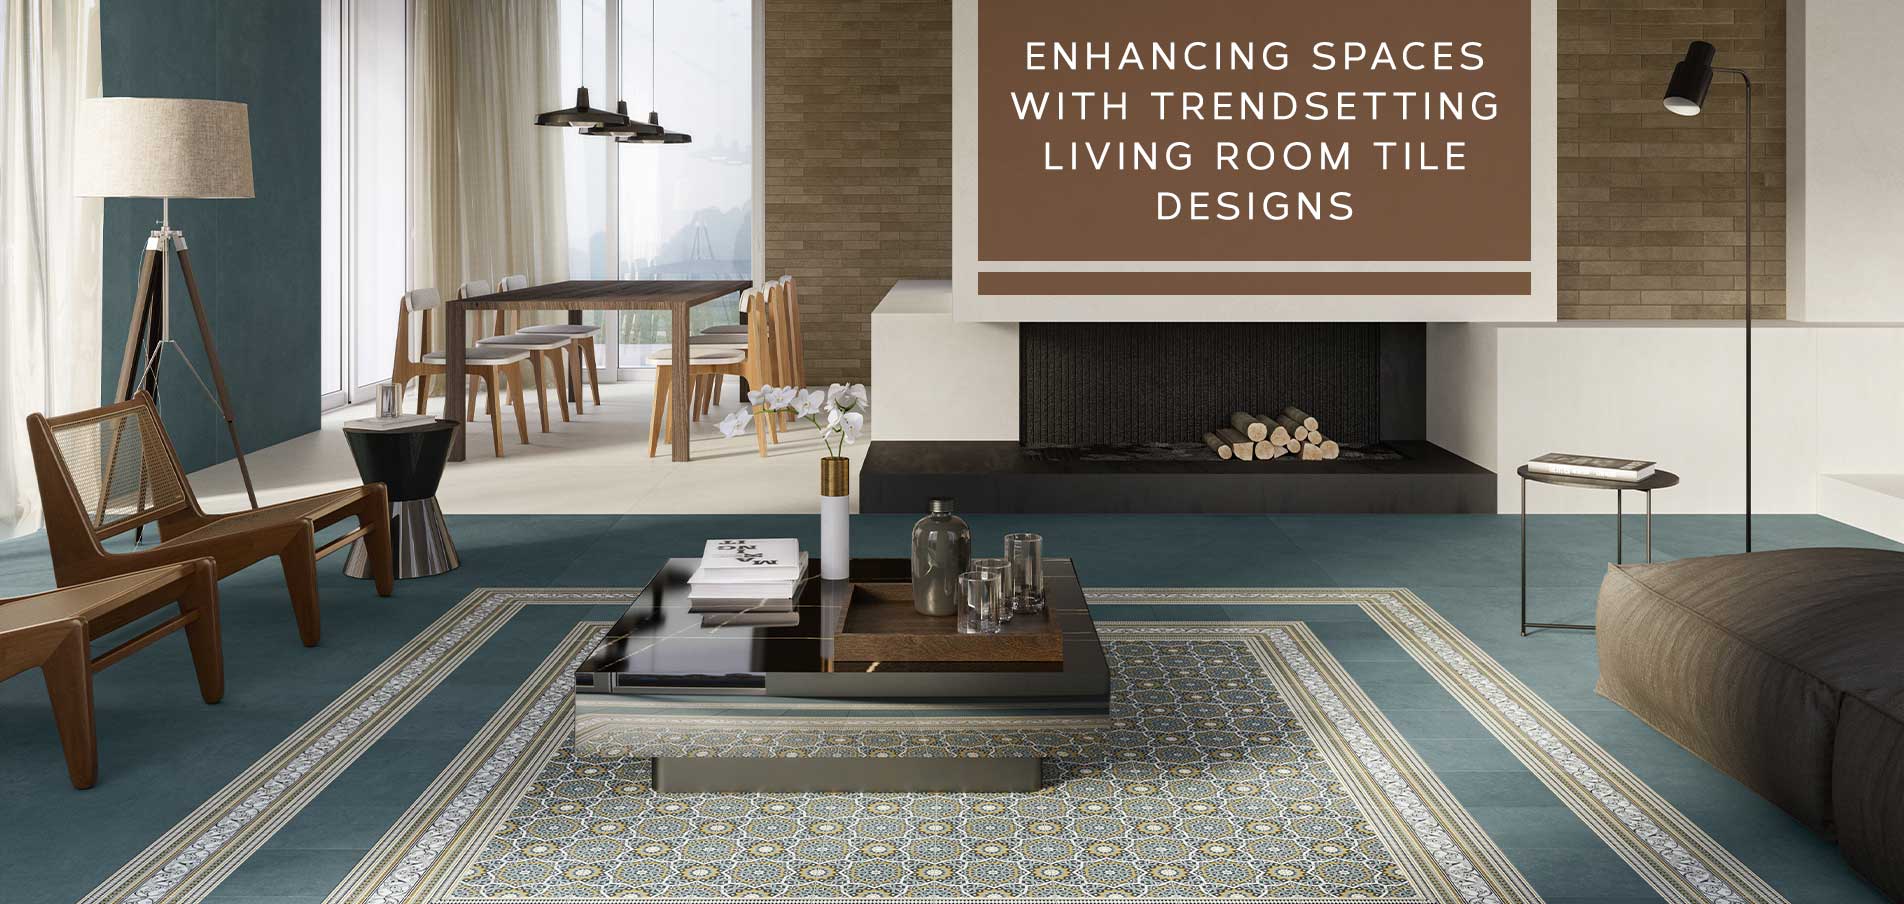 Enhance Spaces with Trendsetting Living Room Design Tiles